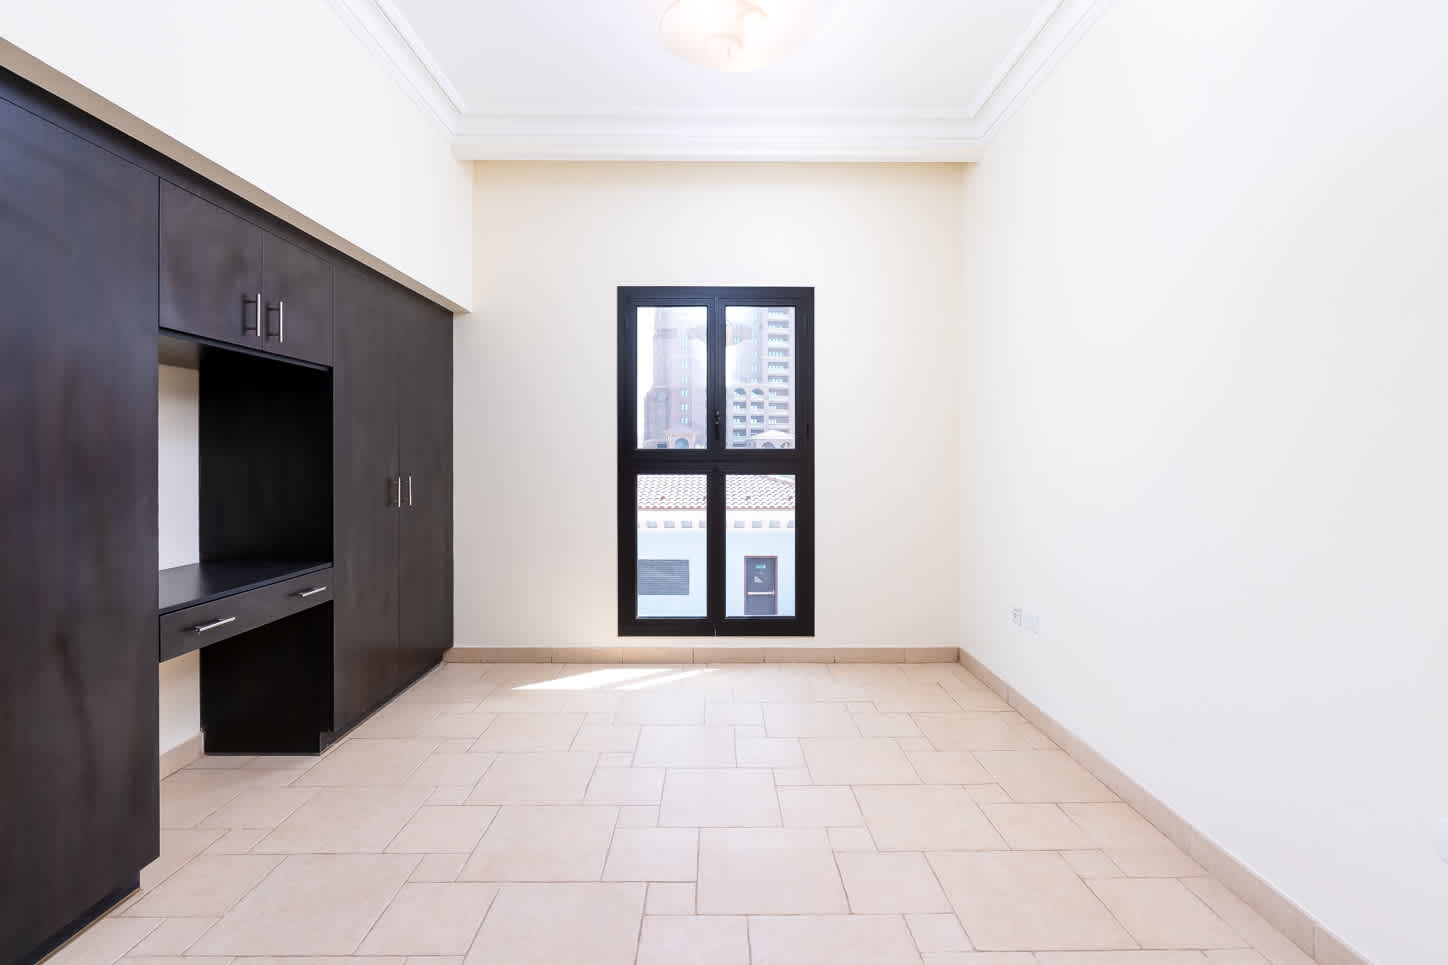 25 Spaces Real Estate - Qanat quartier - Properties for Sale - 18 May 2022 (ref APT25197)9